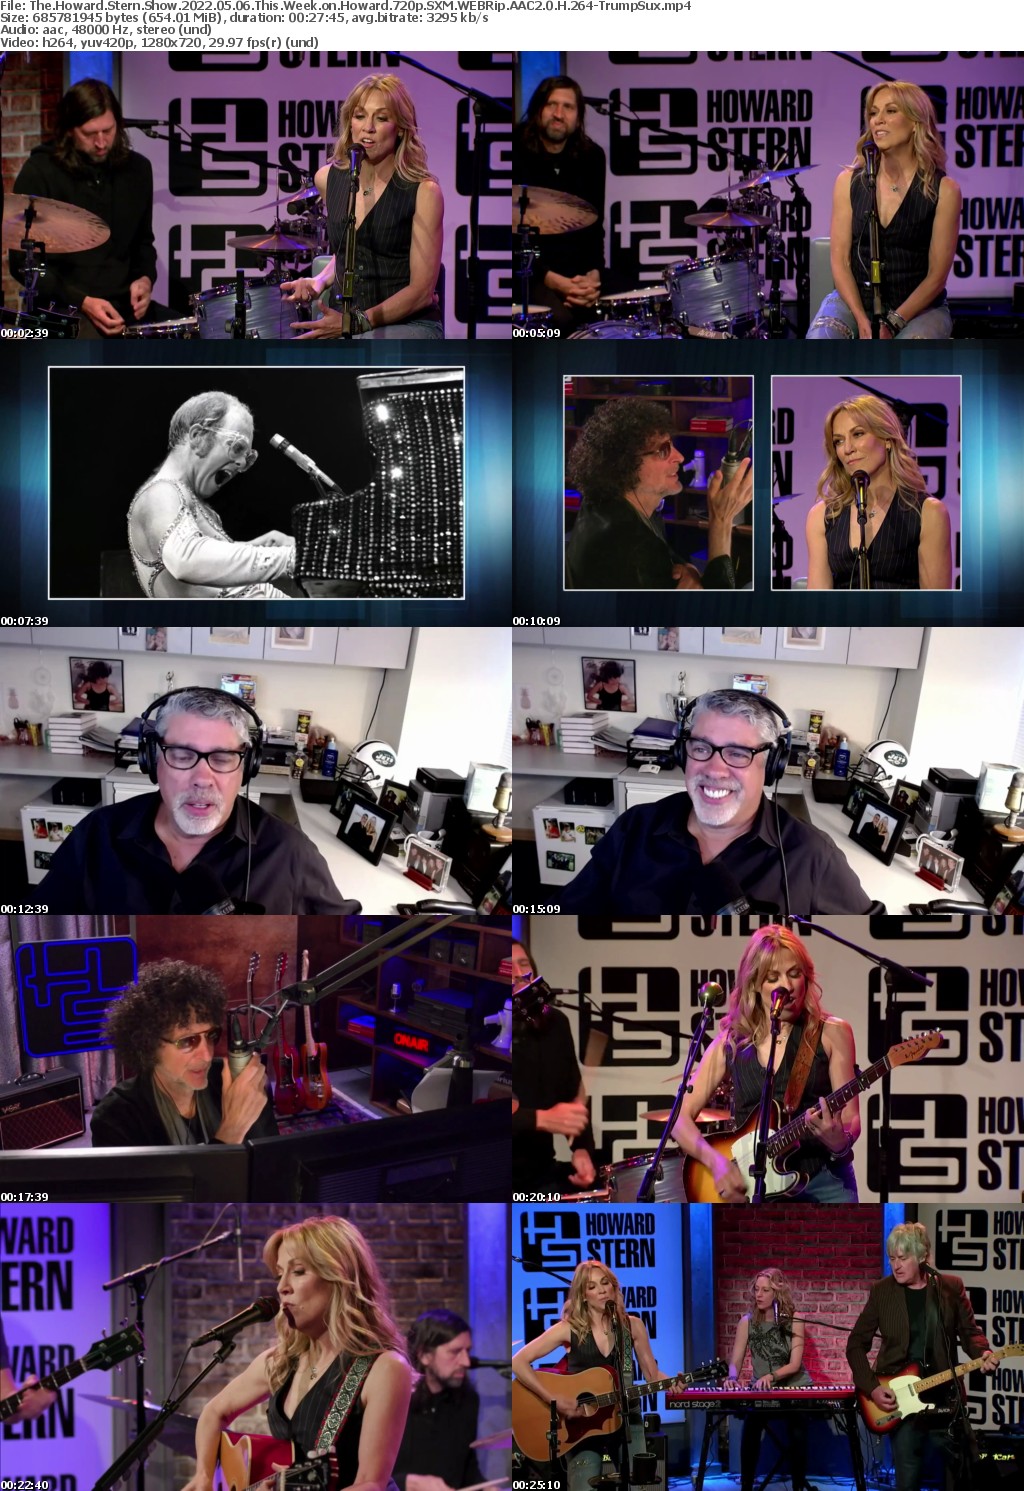 The Howard Stern Show 2022 05 06 This Week on Howard 720p Dbaum2